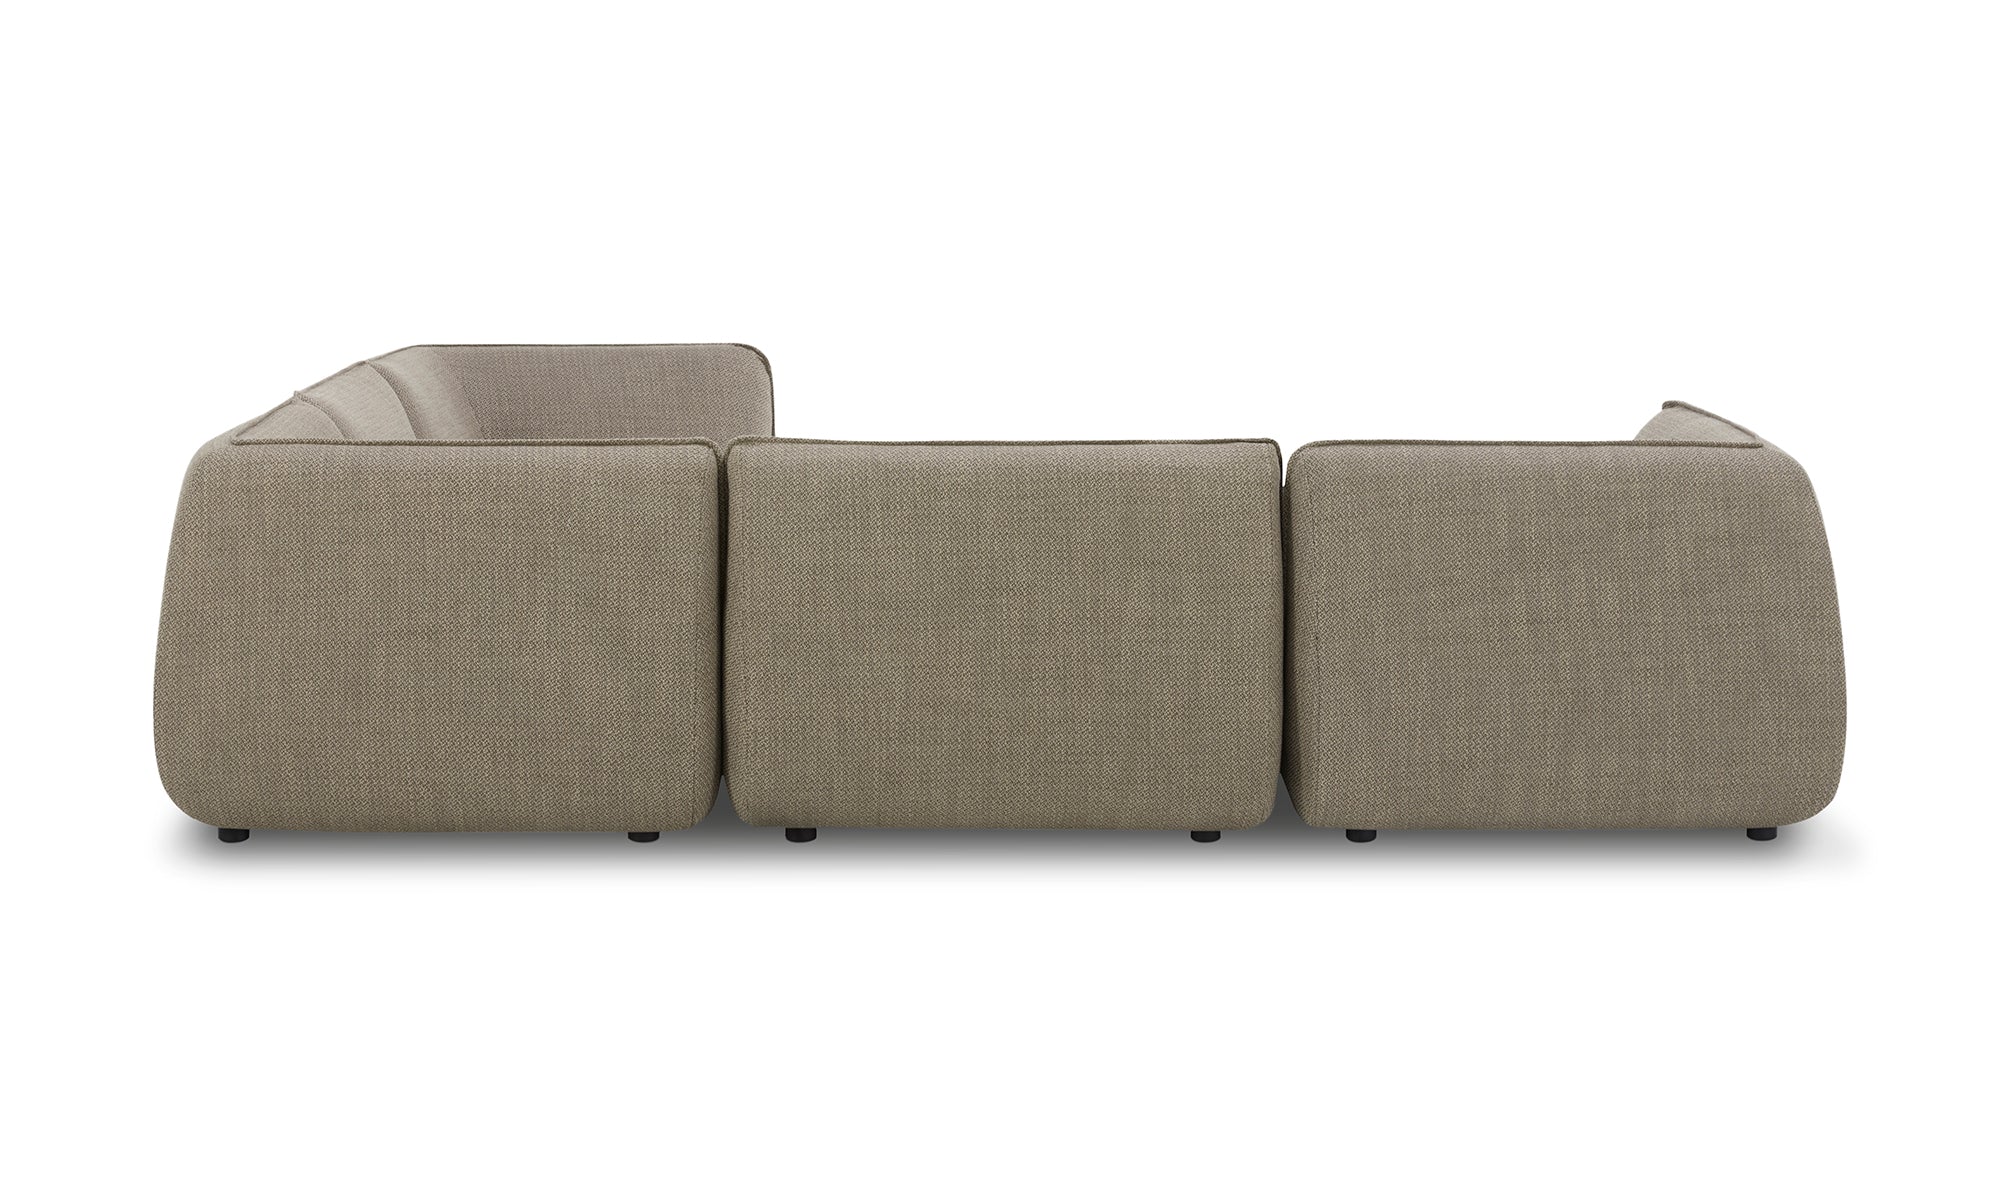 Zeppelin Modular Sectional - Speckled Pumice